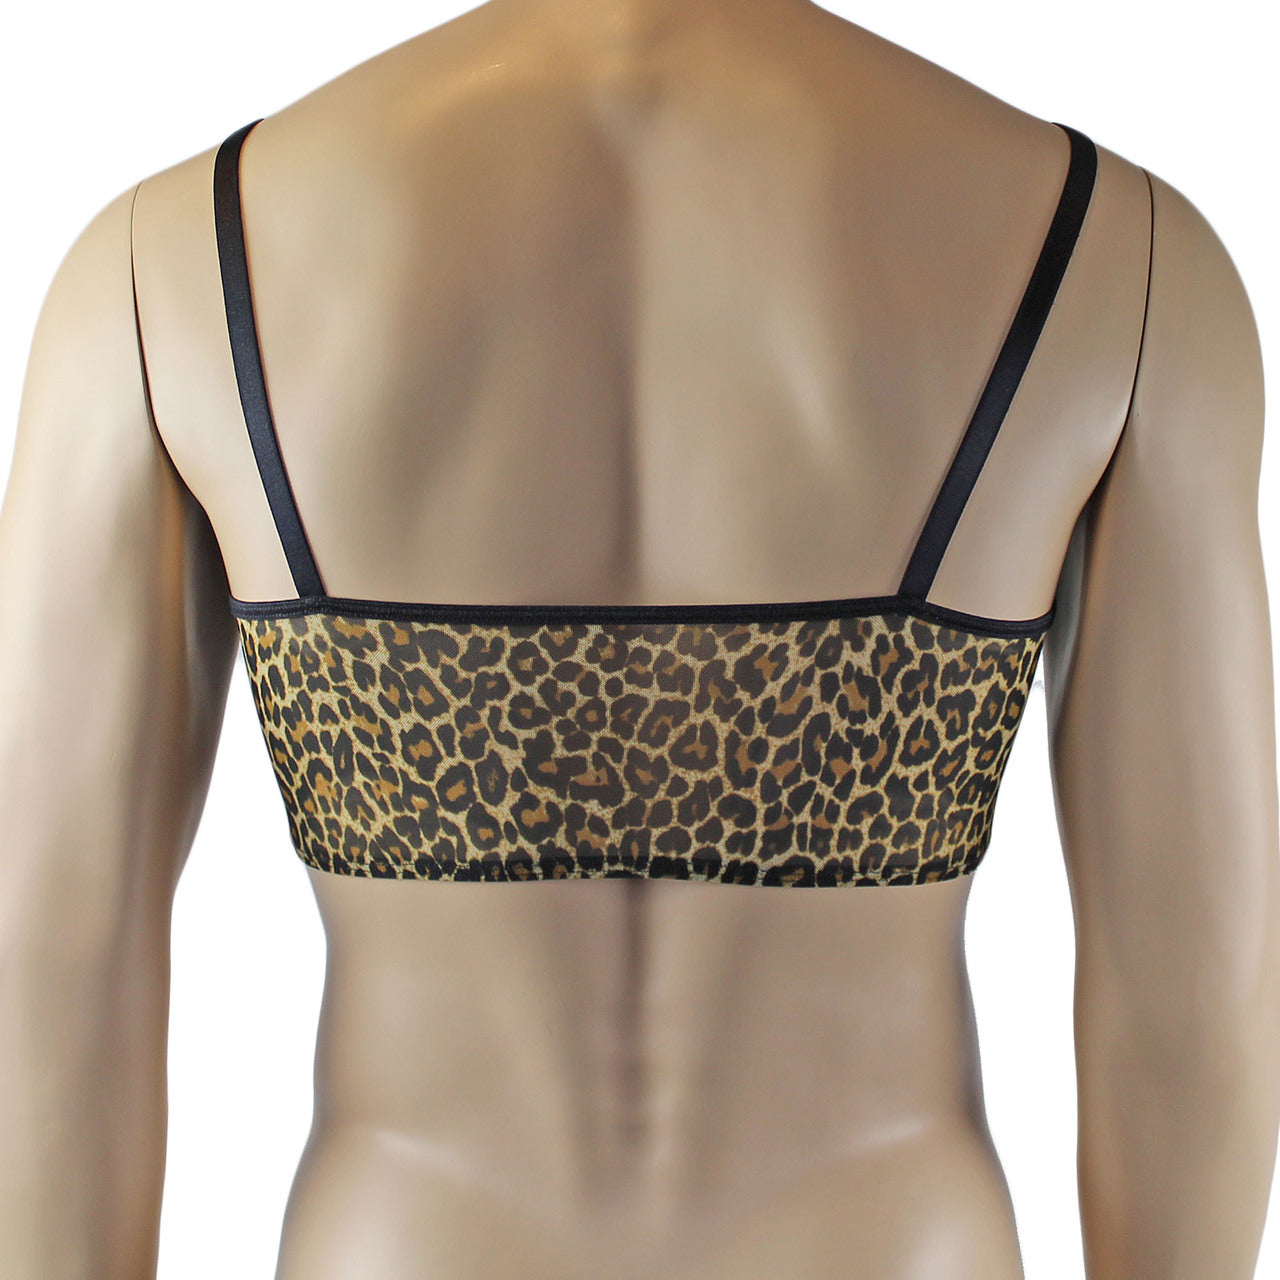 Mens Lingerie Animal Print Camisole Top & Thong Leopard